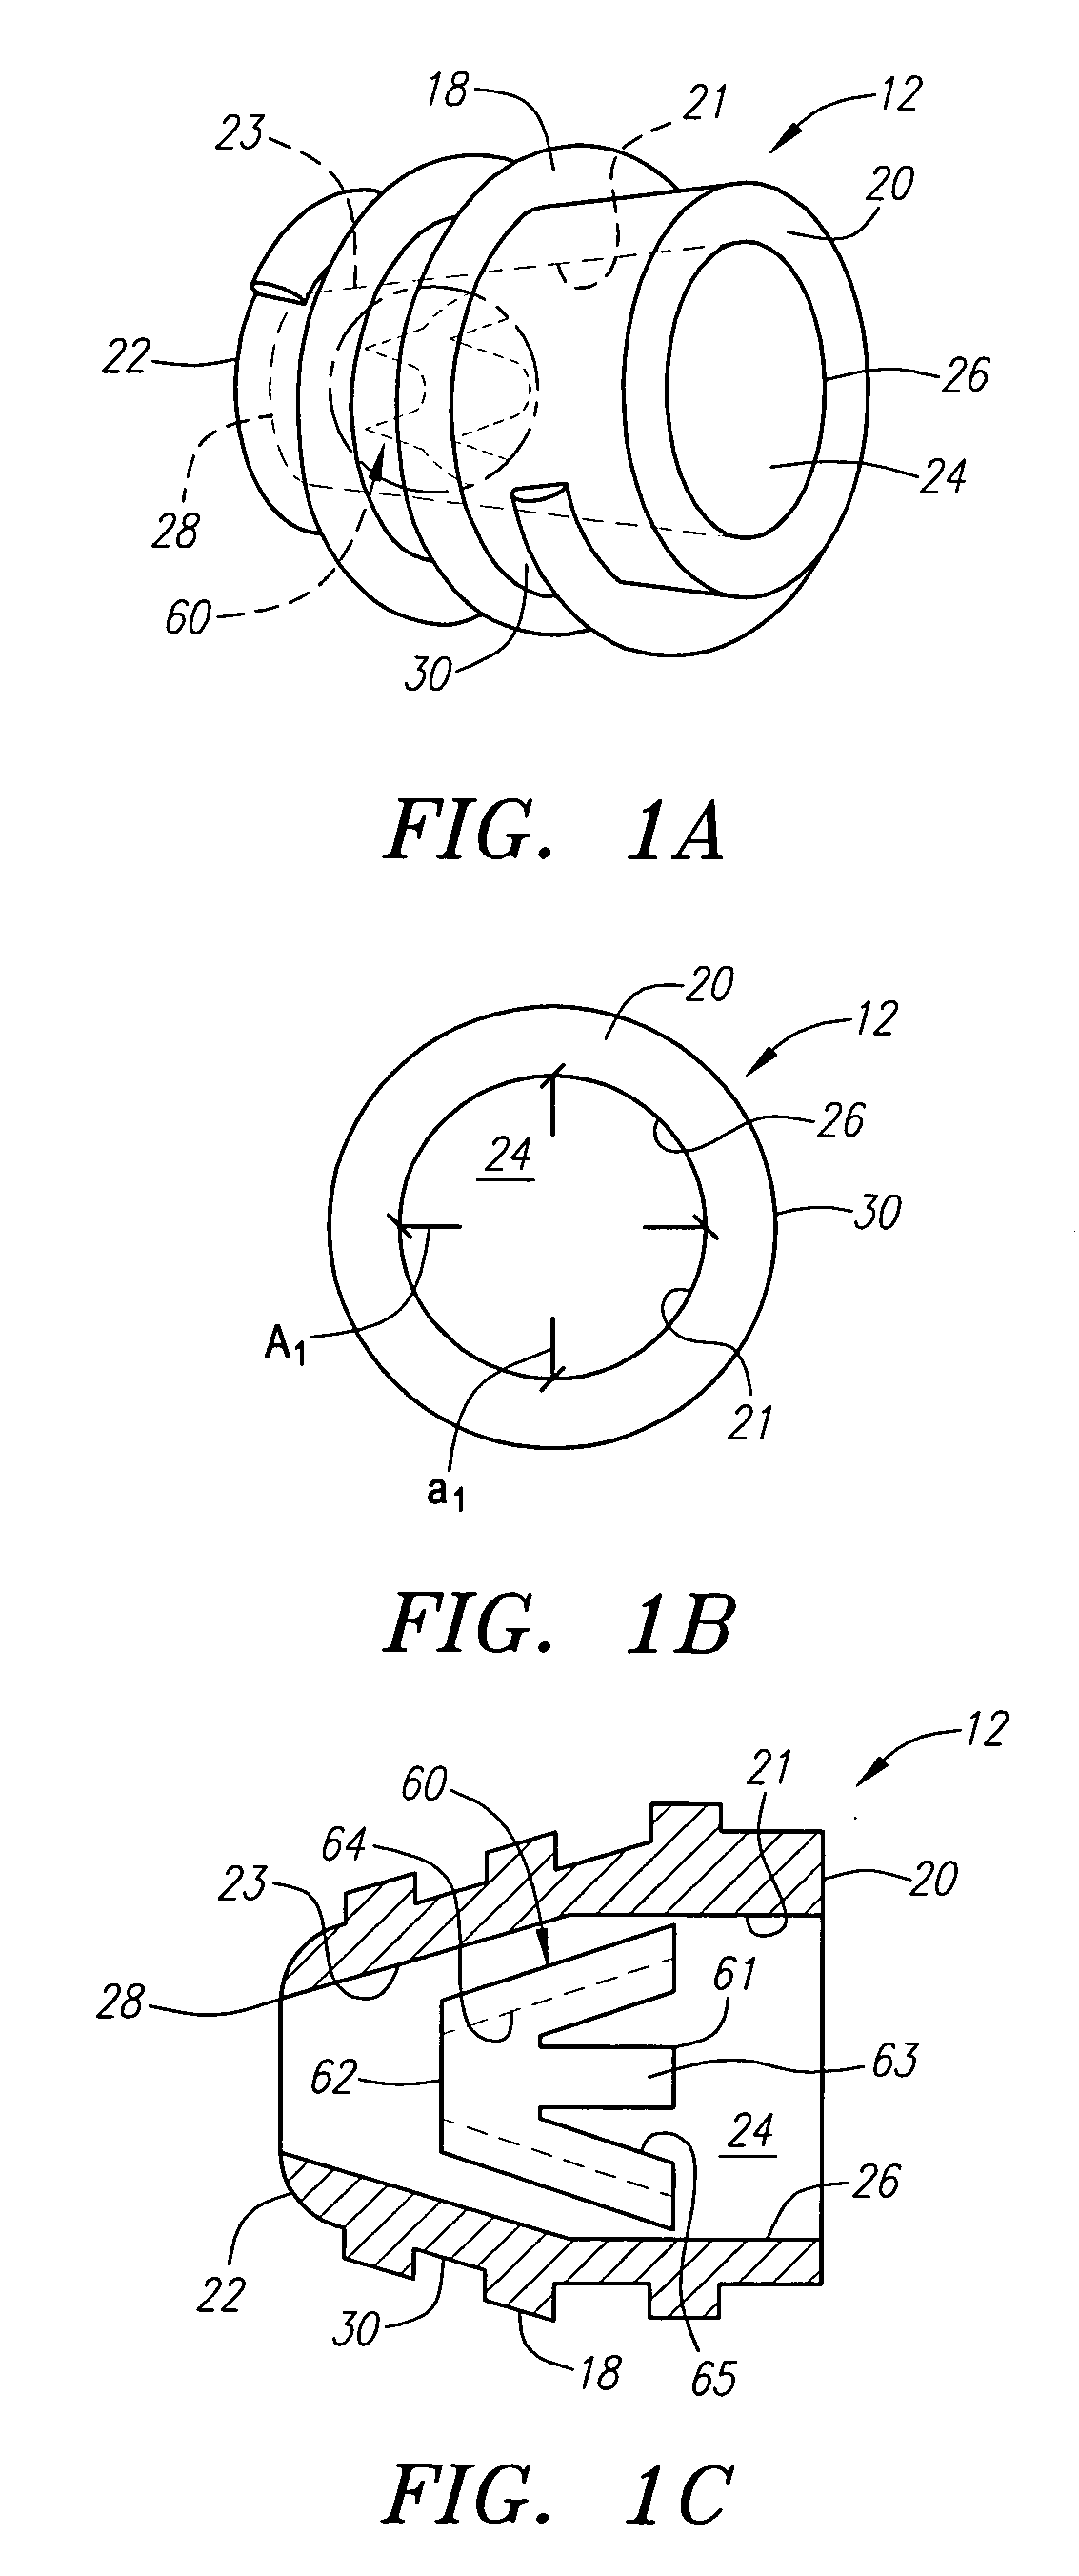 Guide wire element for positioning vascular closure devices and methods for use